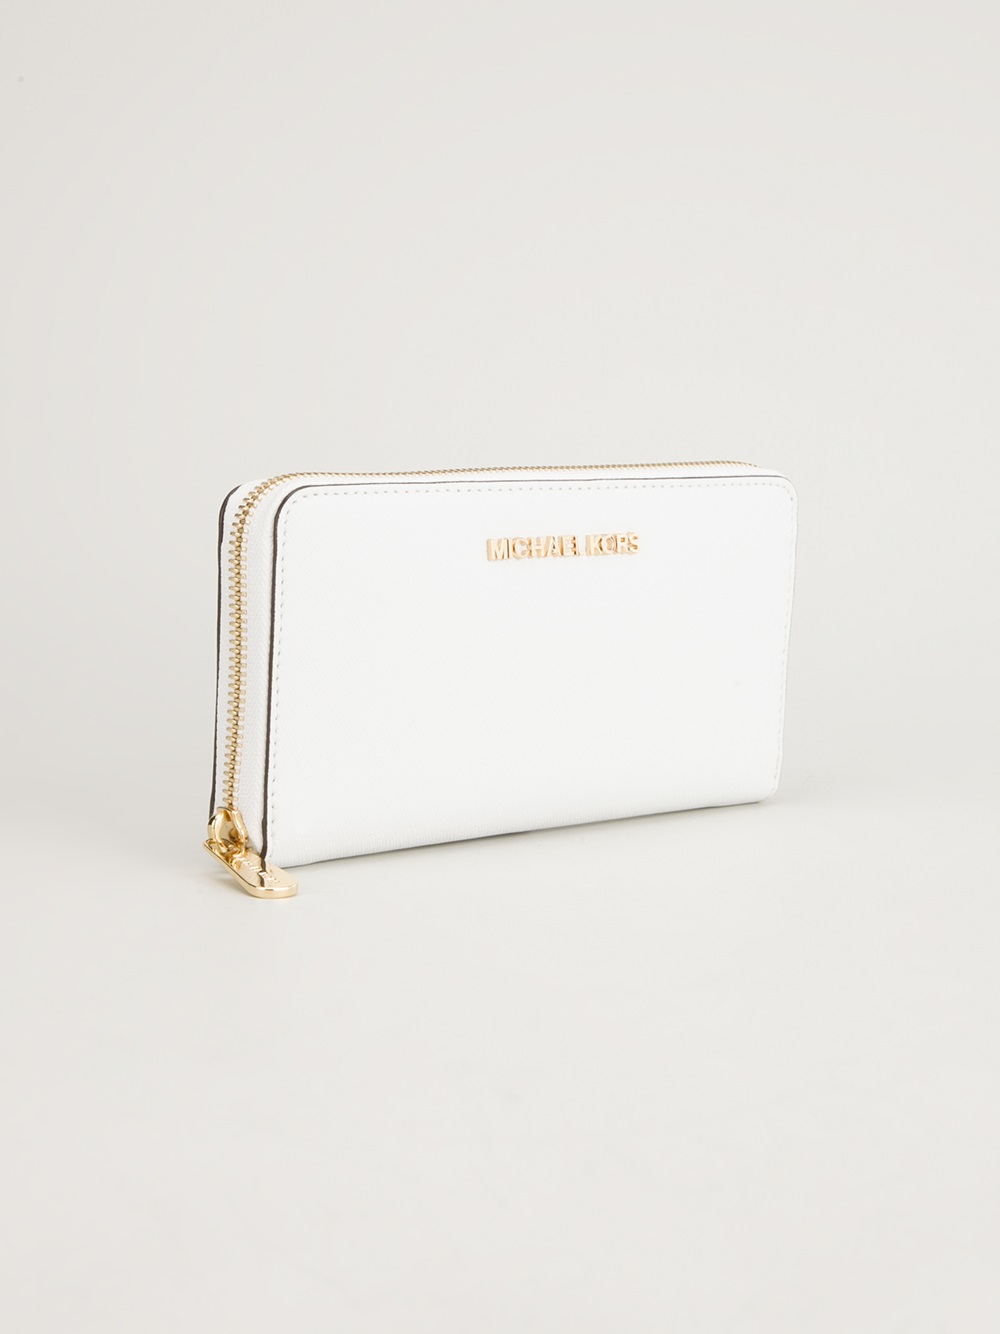 Michael kors 'Jet Set Continental' Wallet in White | Lyst